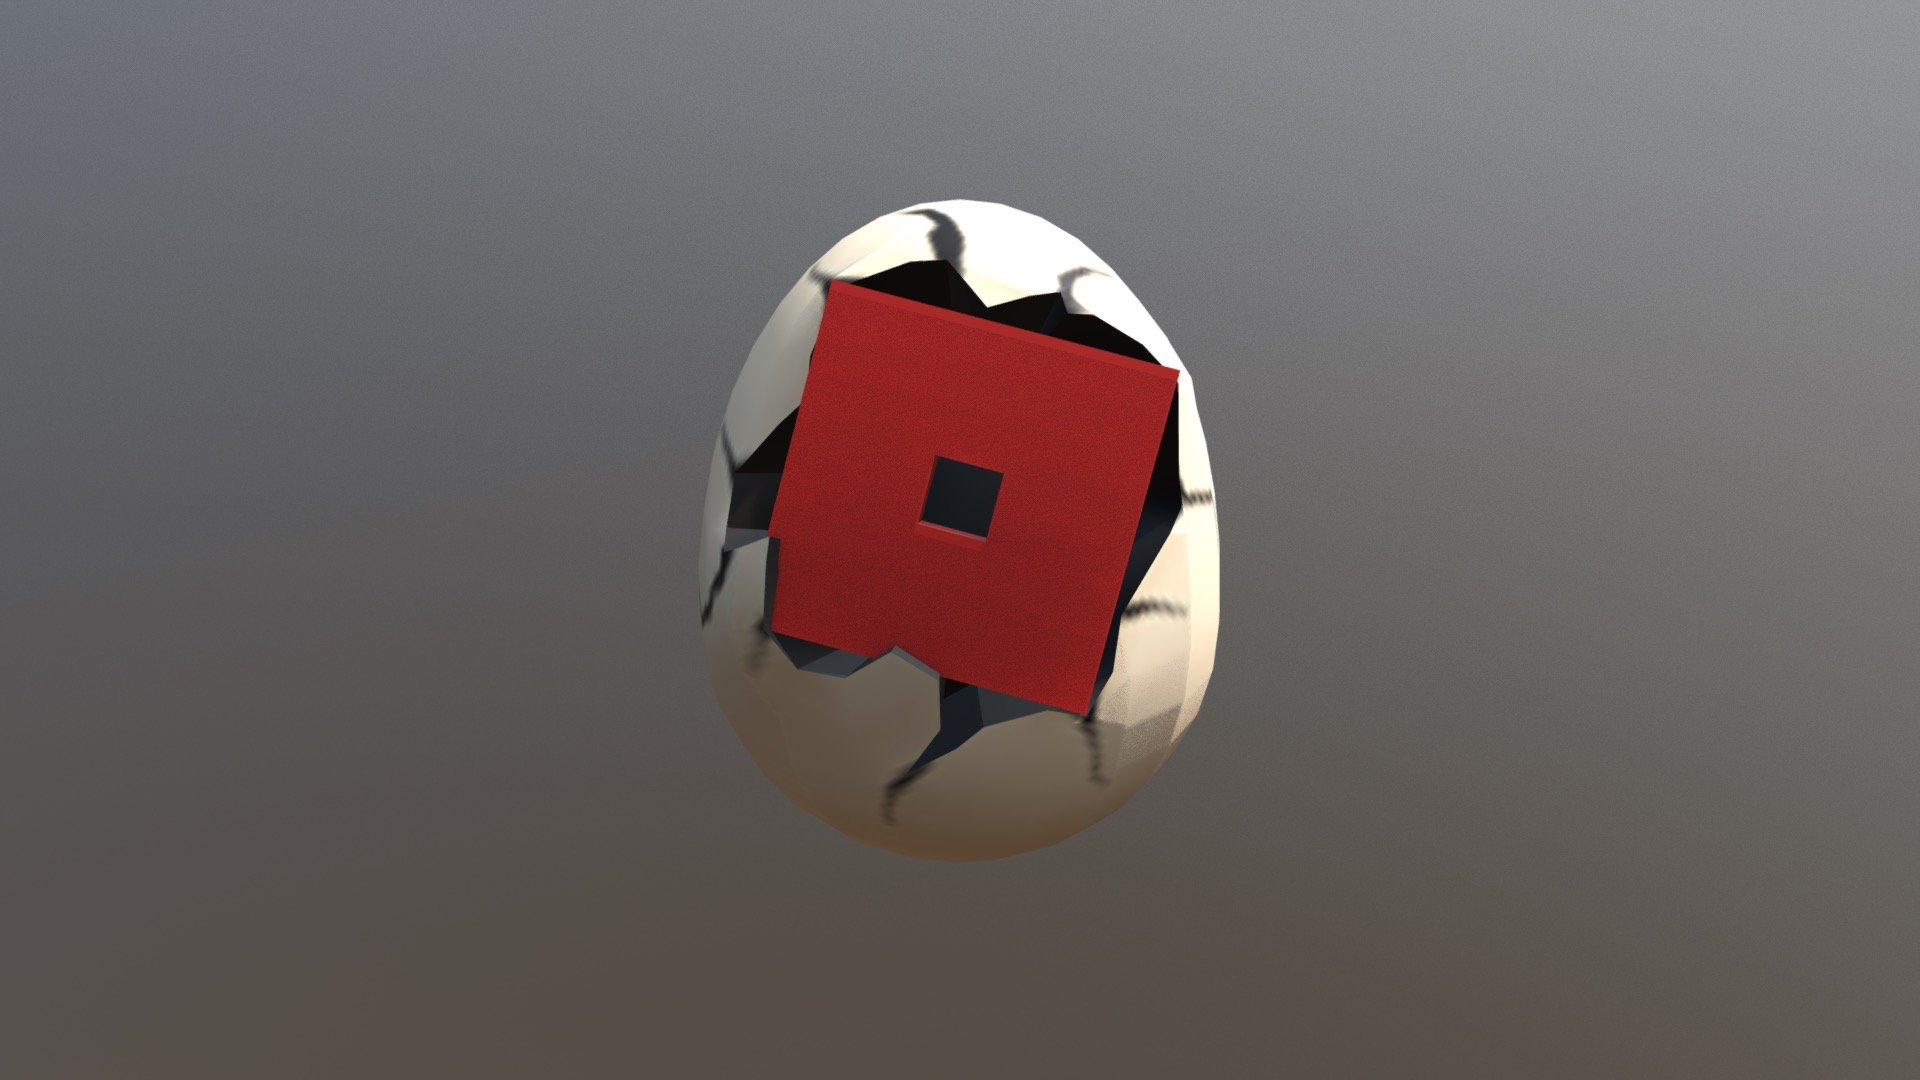 Roblox Egg 3d Model By Alexreed12345 Alexreed12345 C1205f5 - roblox despacito 21 code